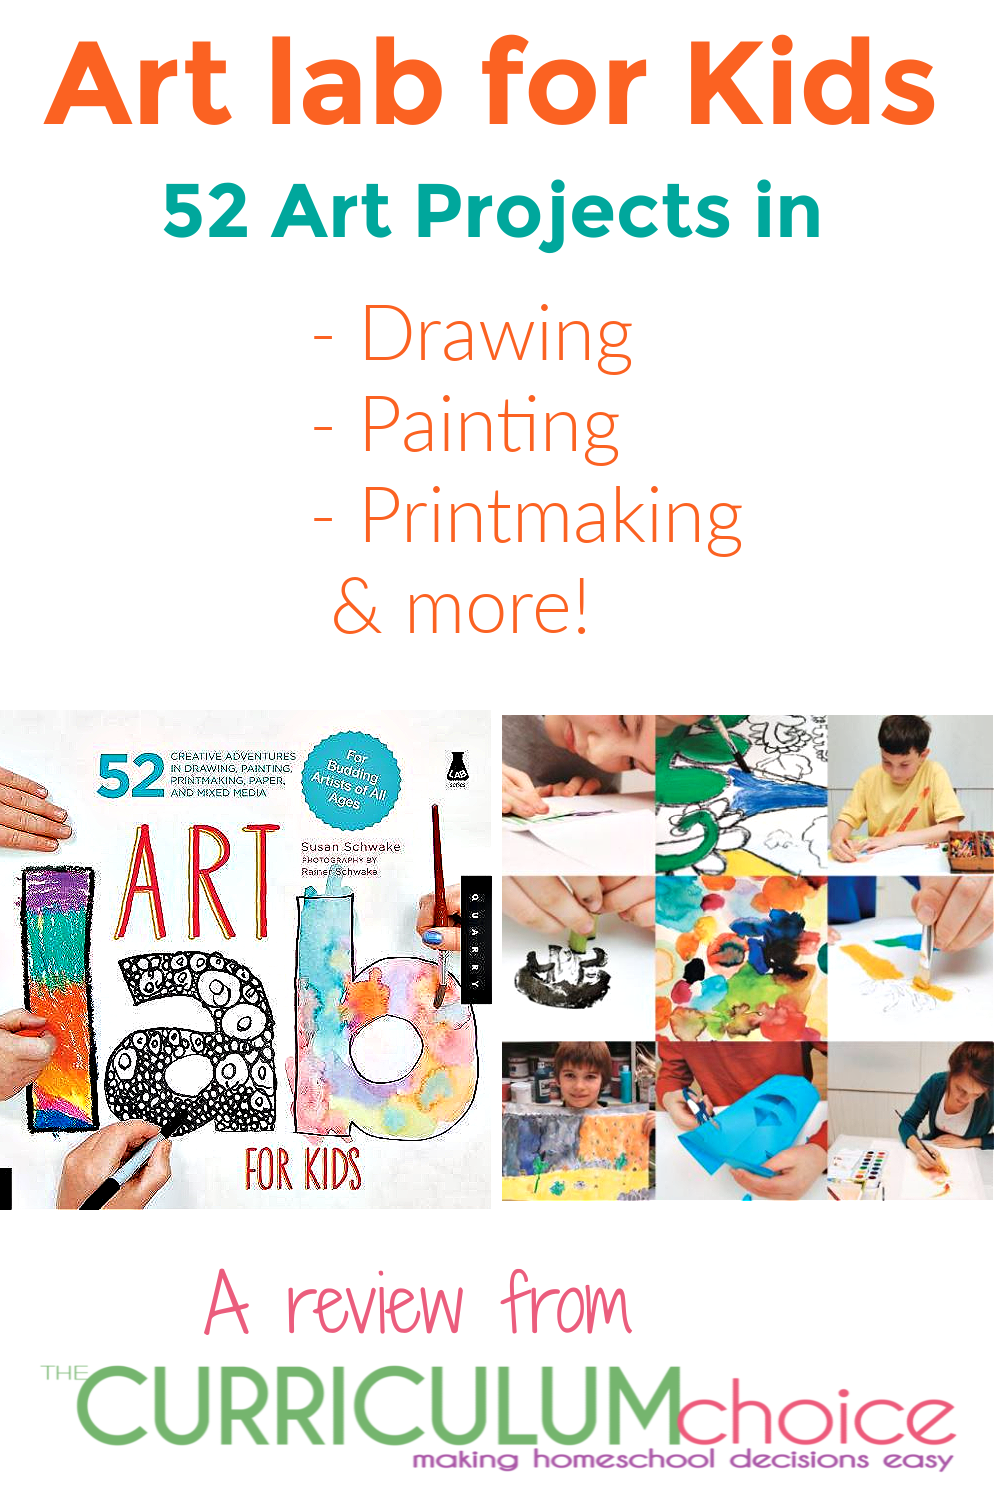 Art Lab for Kids offers you 52 fun and interesting art projects for your homeschool with little preparation and excellent results. Drawing, painting, printmaking and more! A review from The Curriculum Choice